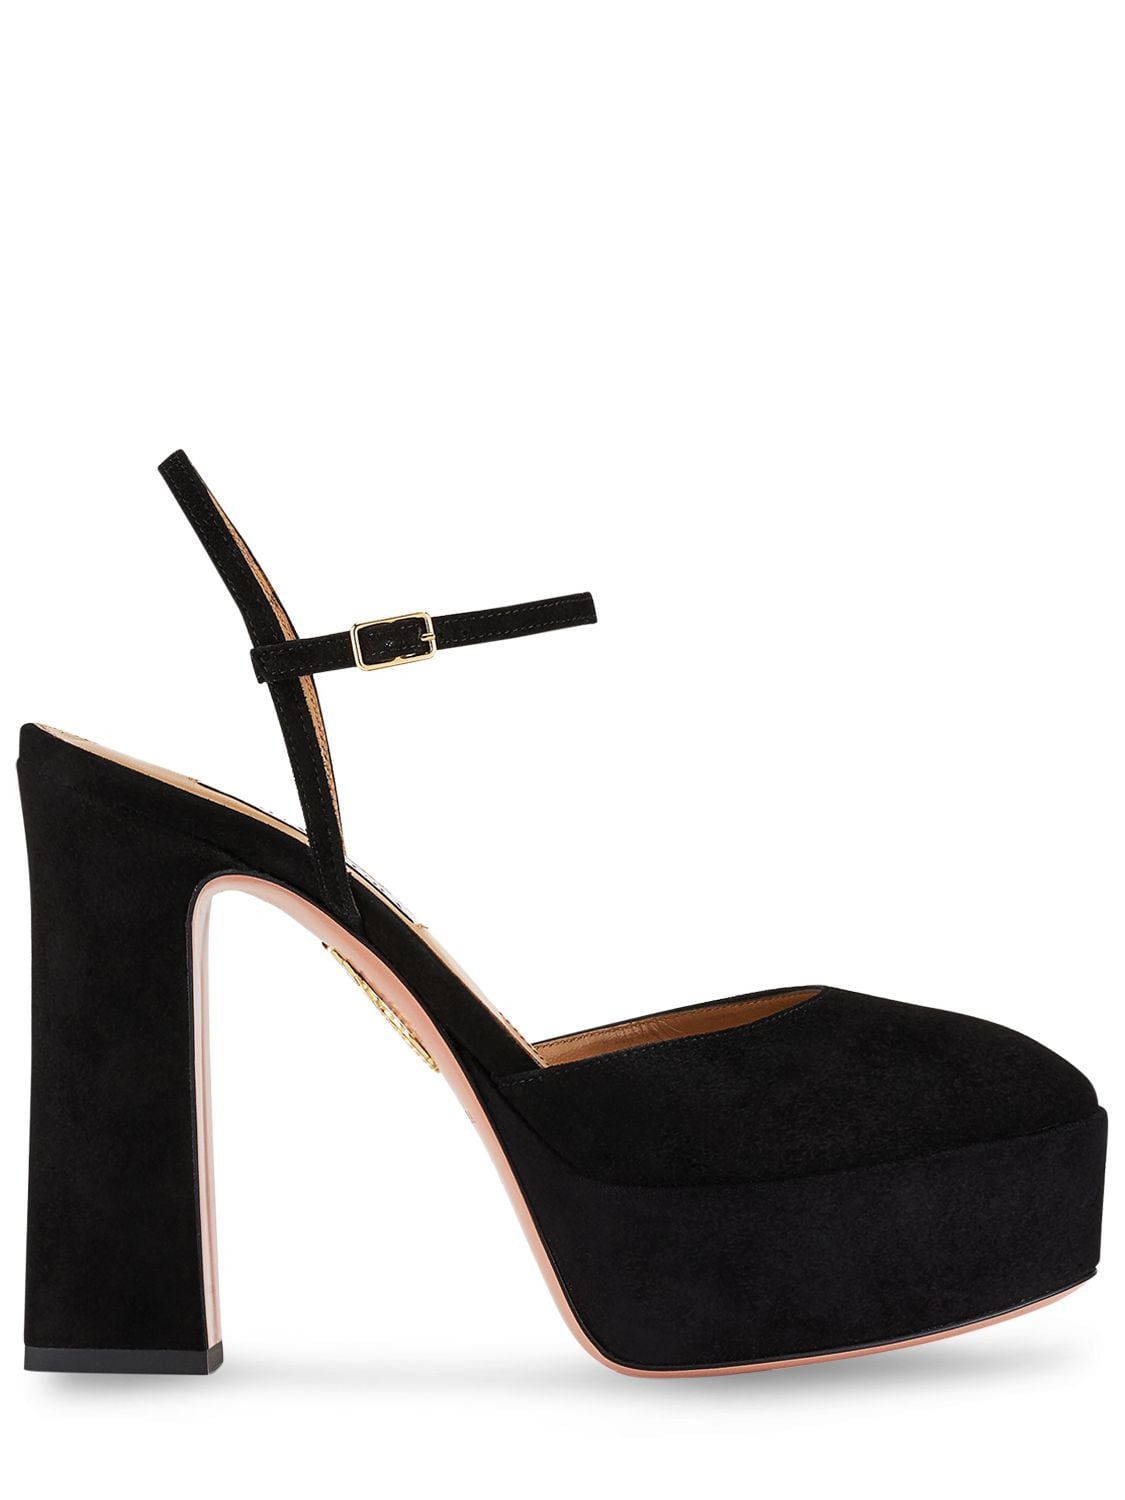 Image of 120mm Groove Plateu Suede Pumps